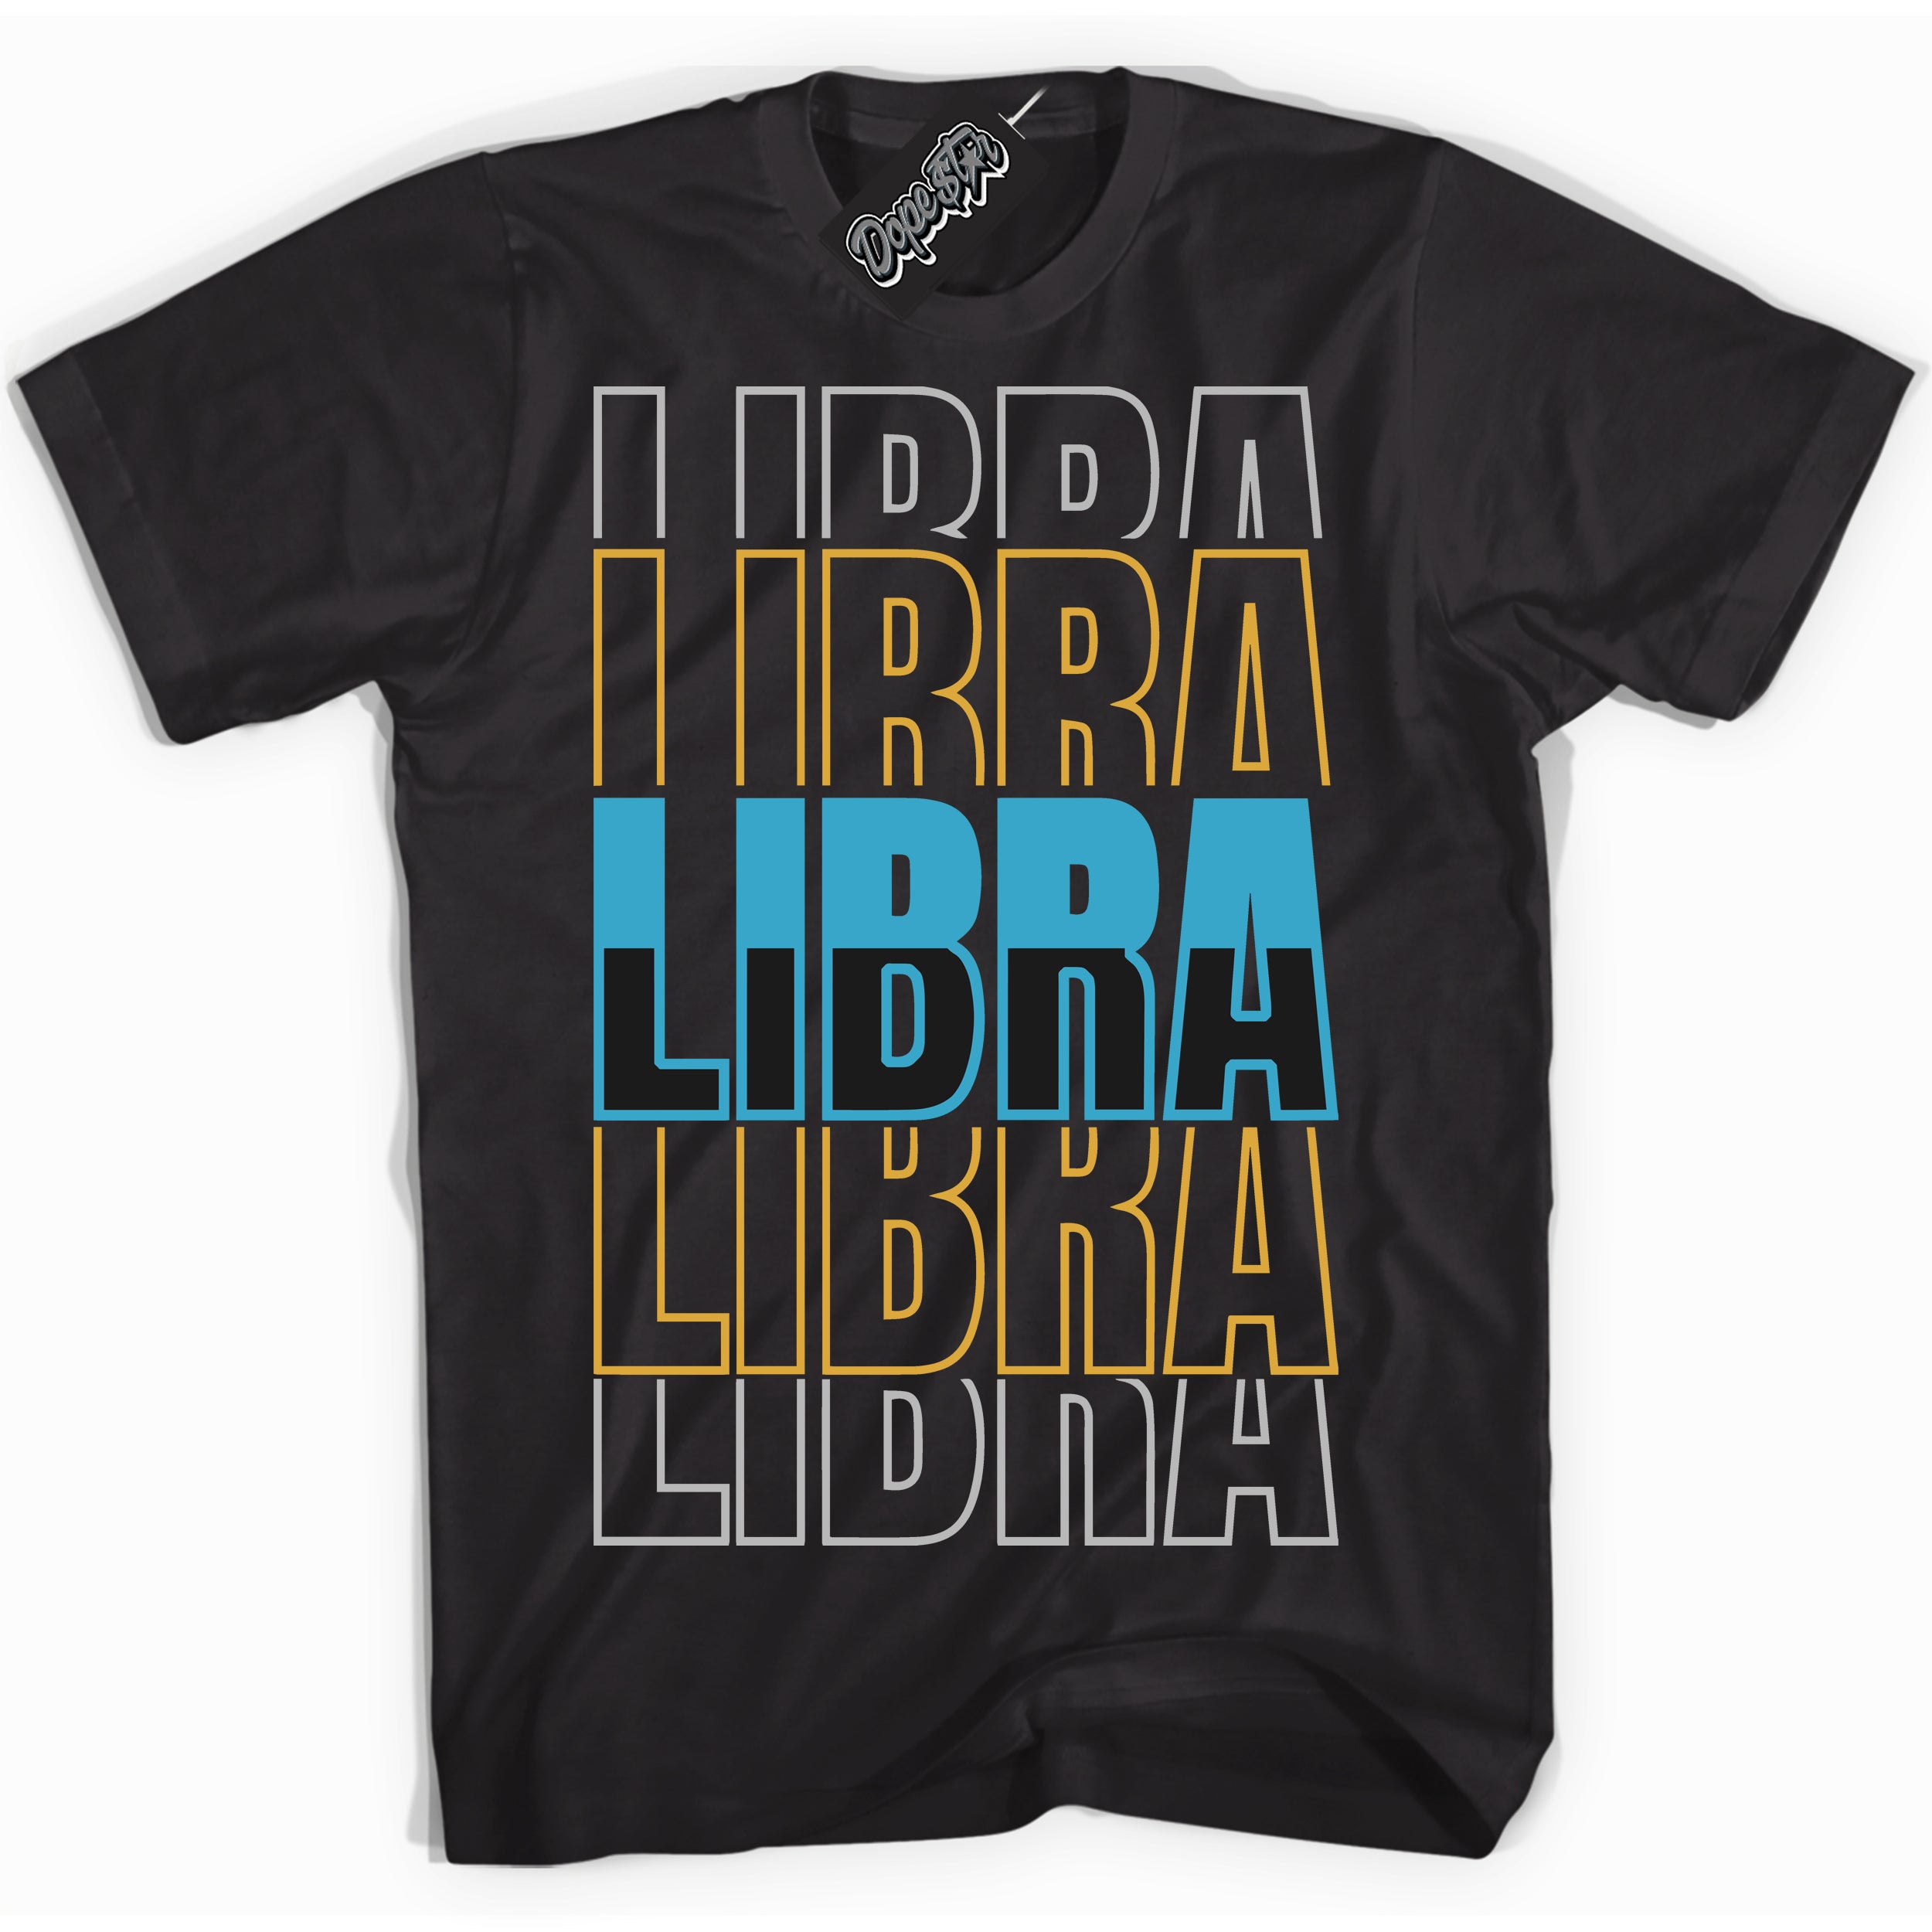 Cool Black Shirt with “ Libra” design that perfectly matches Aqua 5s Sneakers.